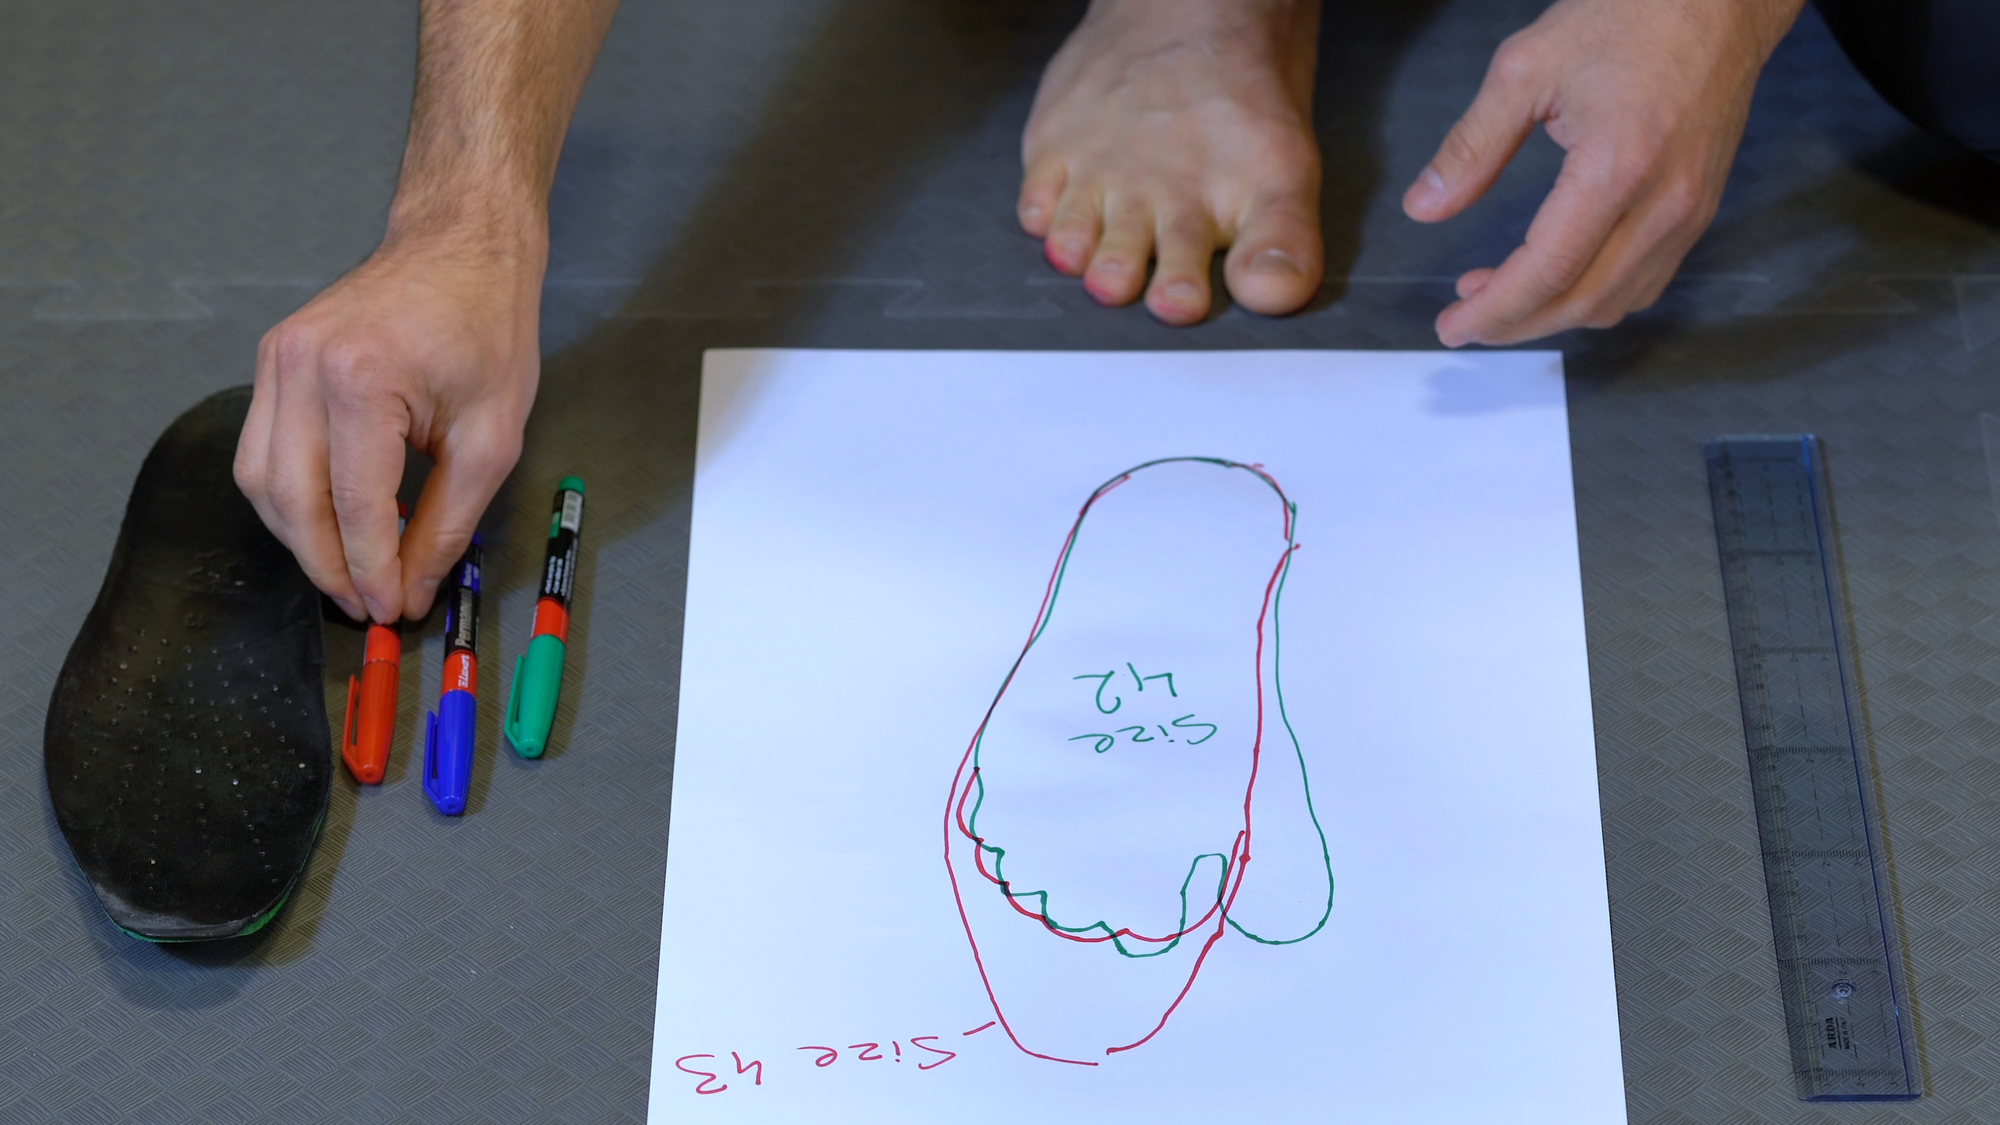 What is a functional foot?